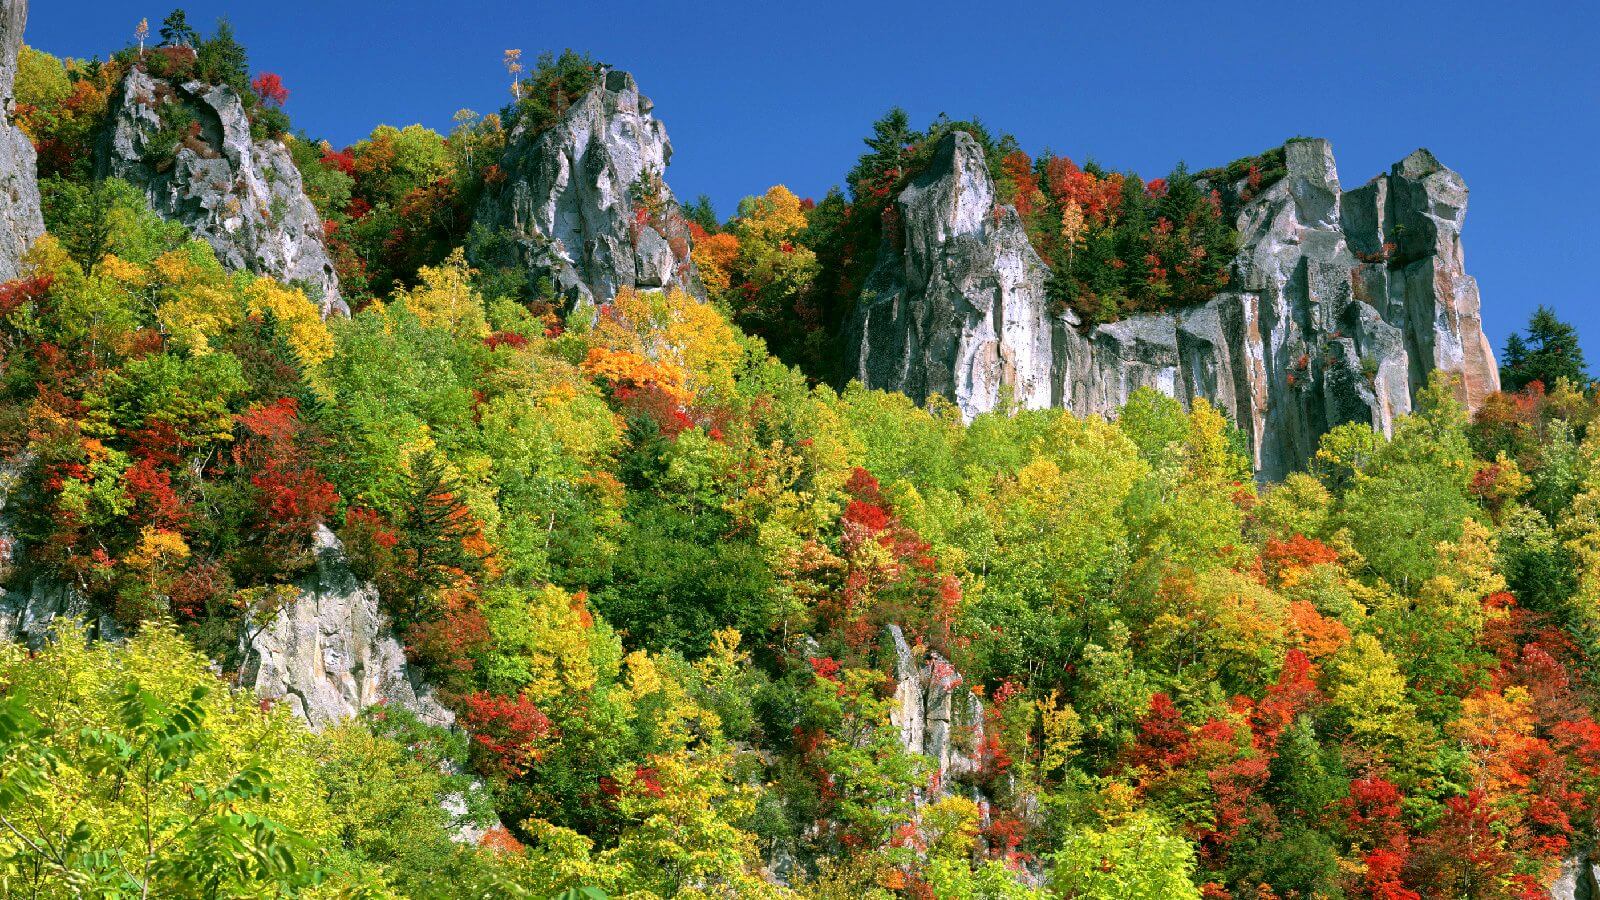 Sounkyo Gorge: From Shimmering Waters to Explosions of Autumn Color – HOKKAIDO LOVE!